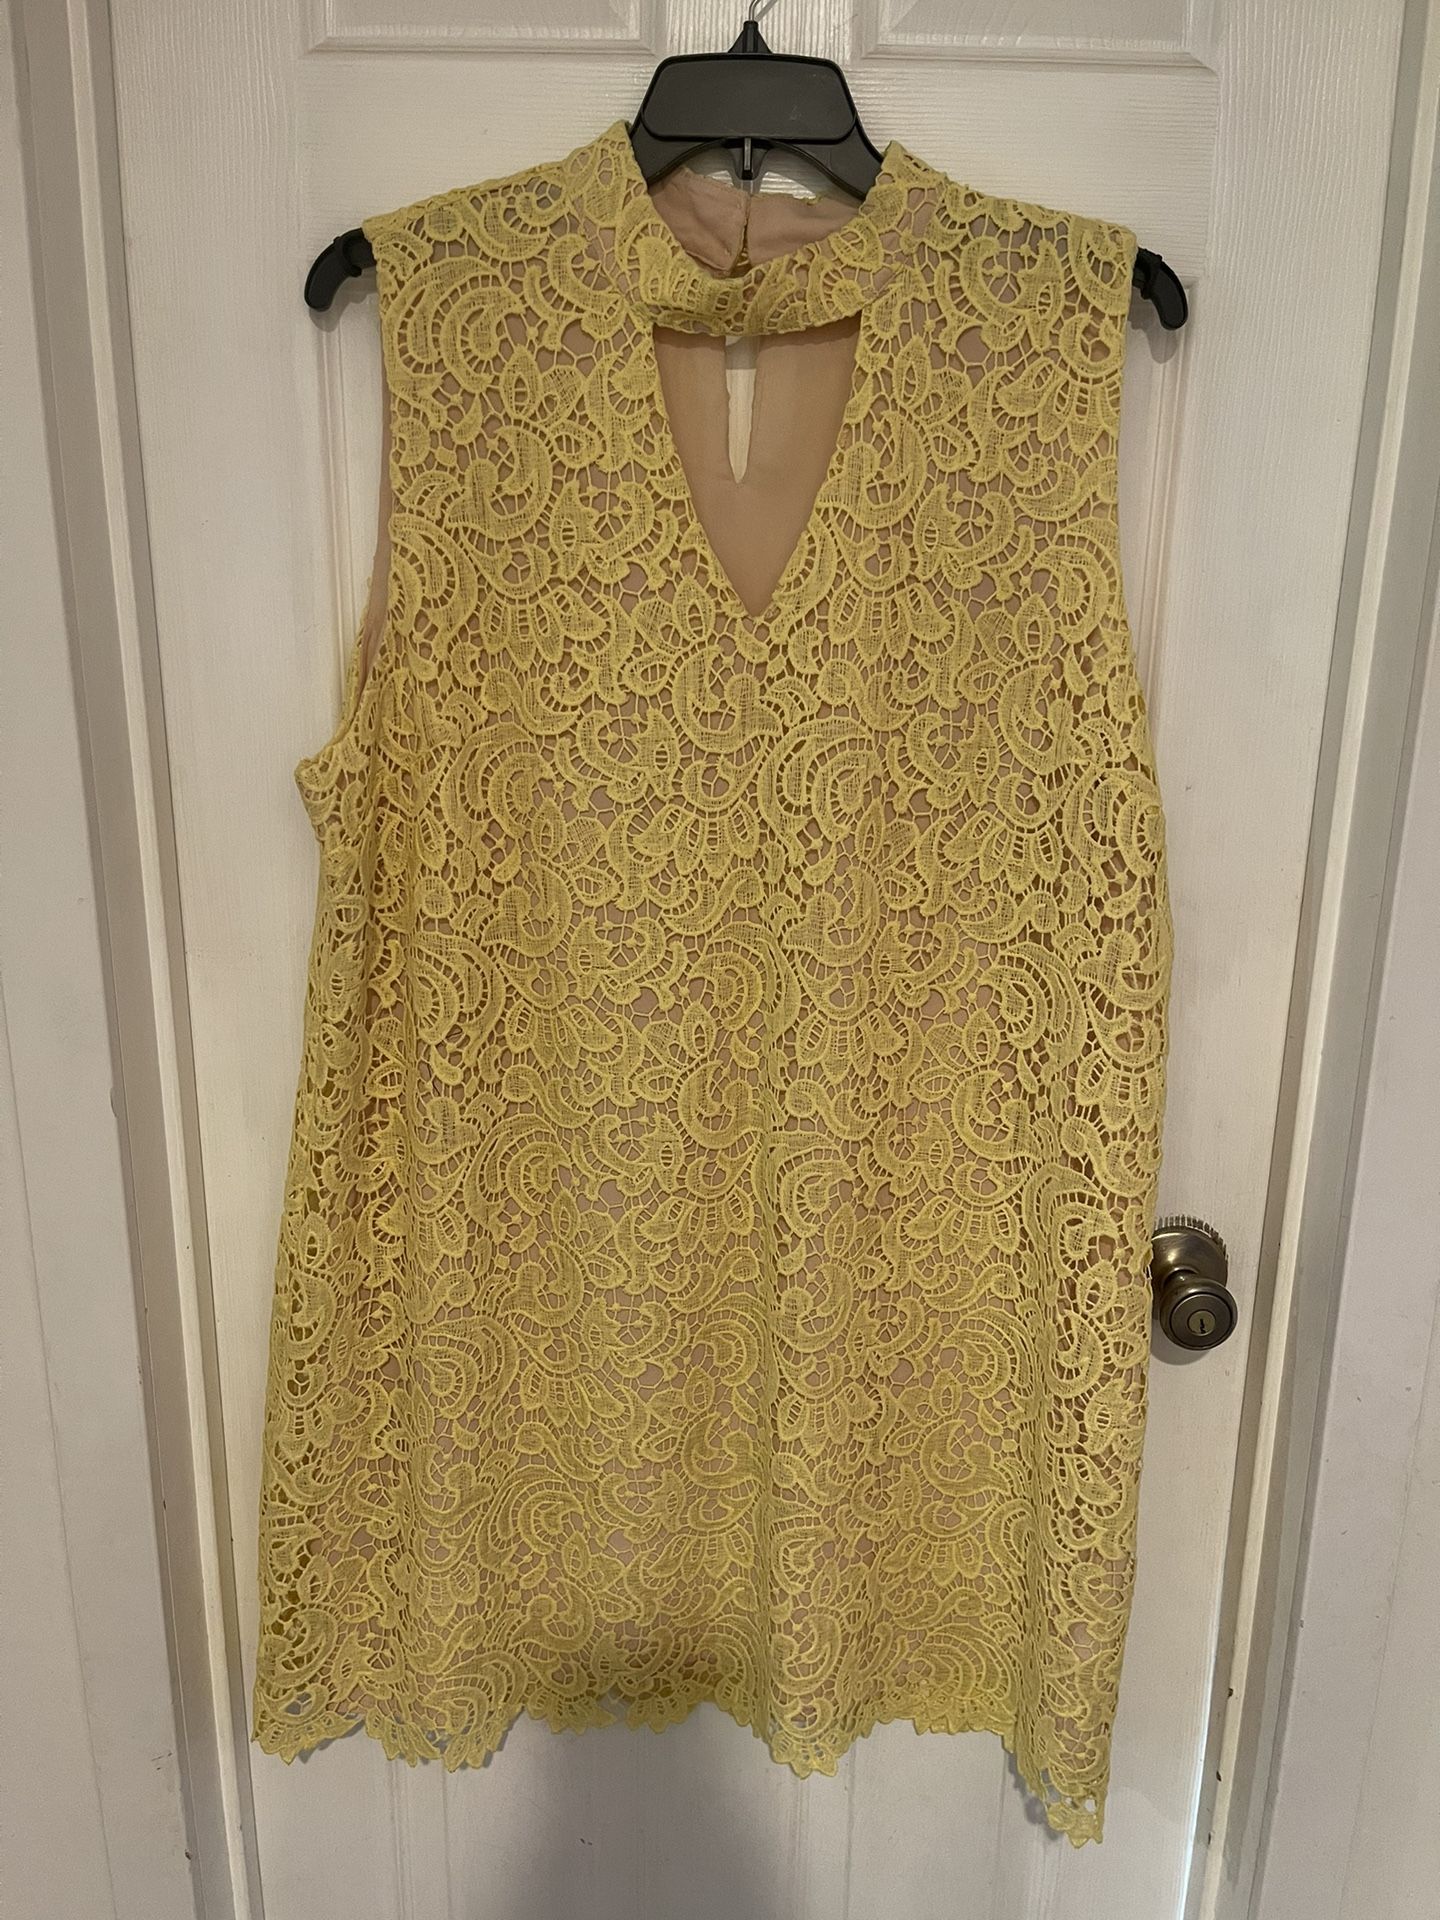 Size 3x yellow lace tank dress with small v-neck 